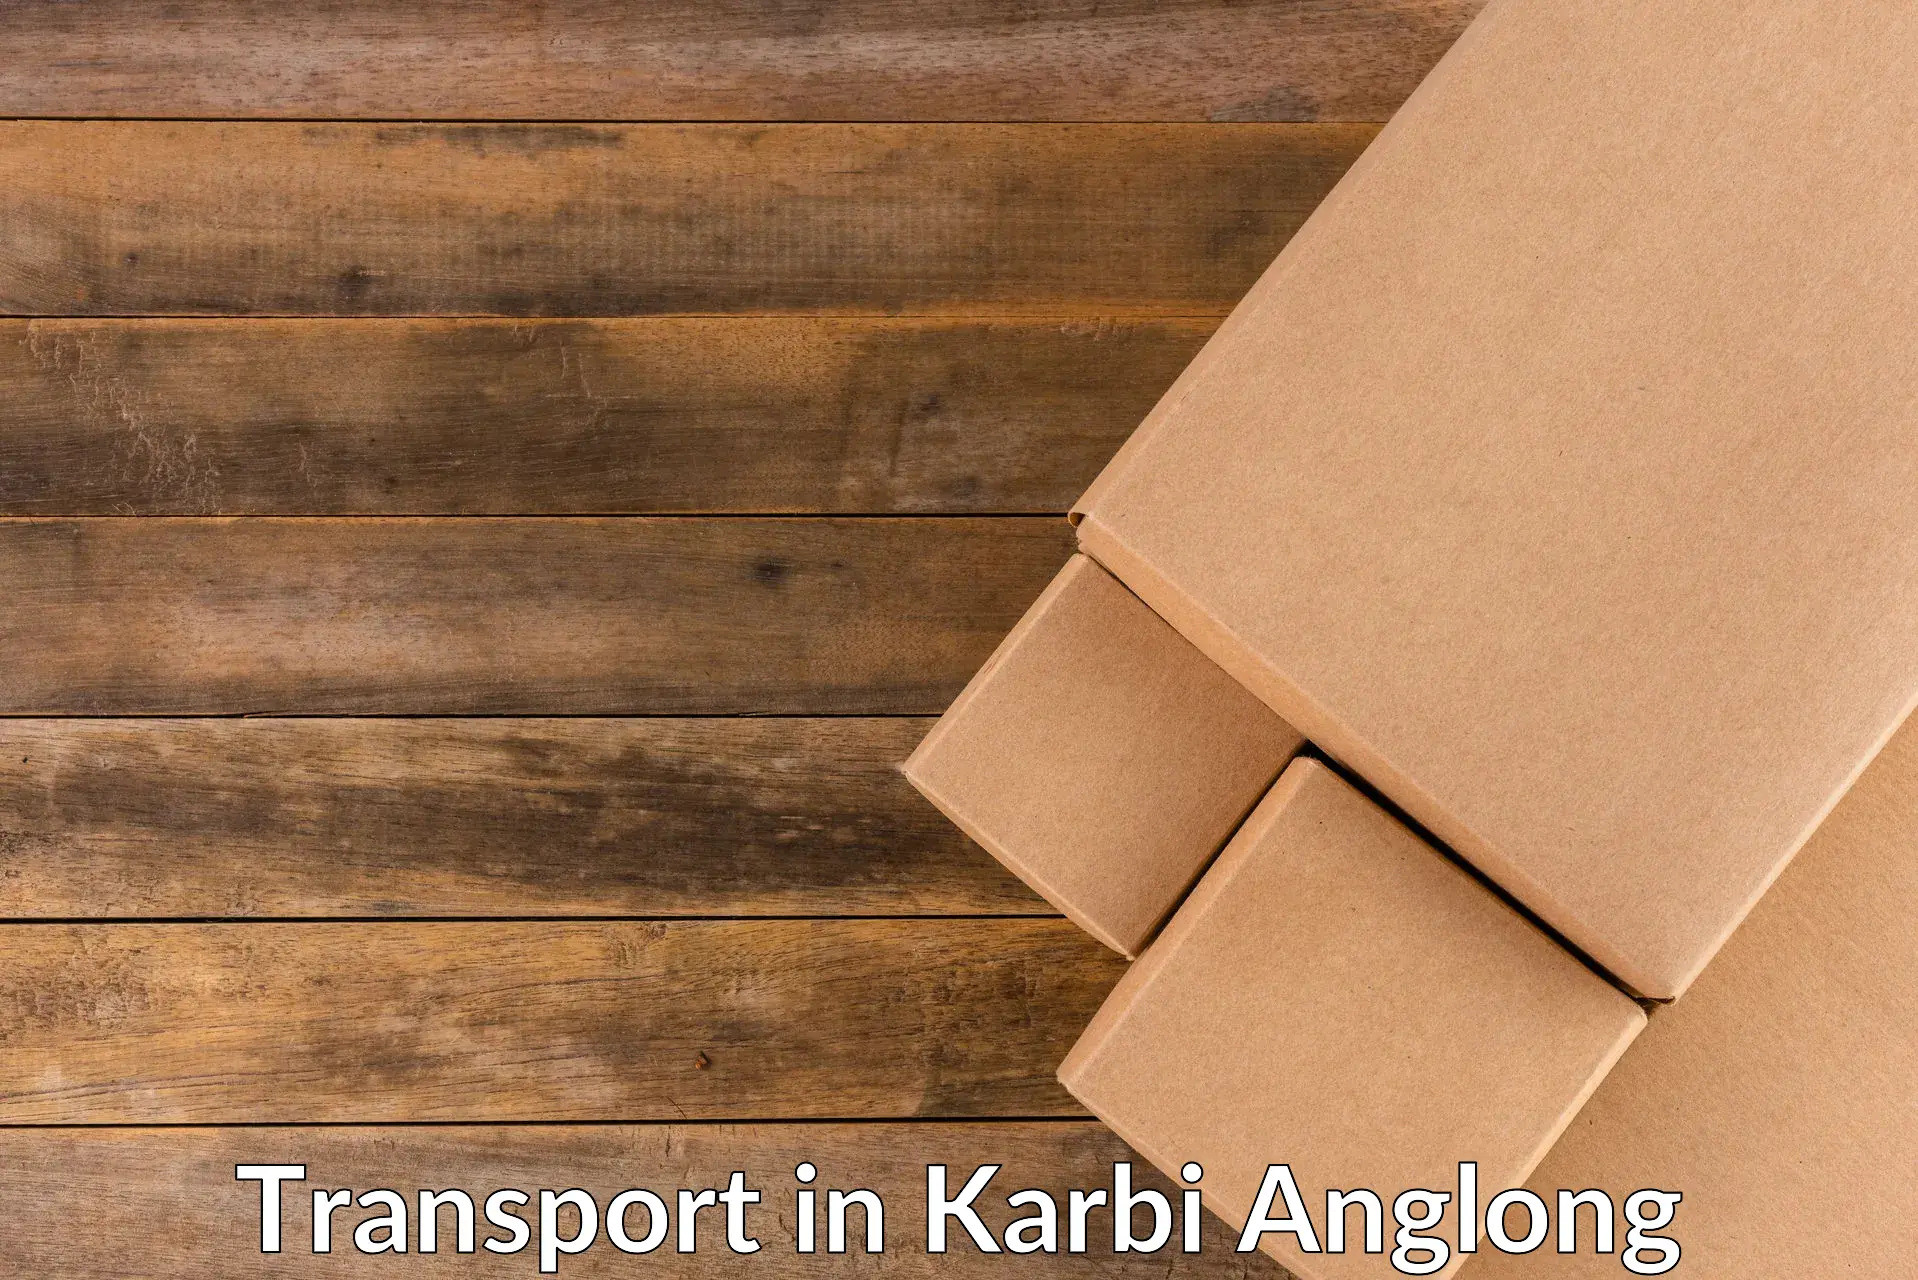 Lorry transport service in Karbi Anglong